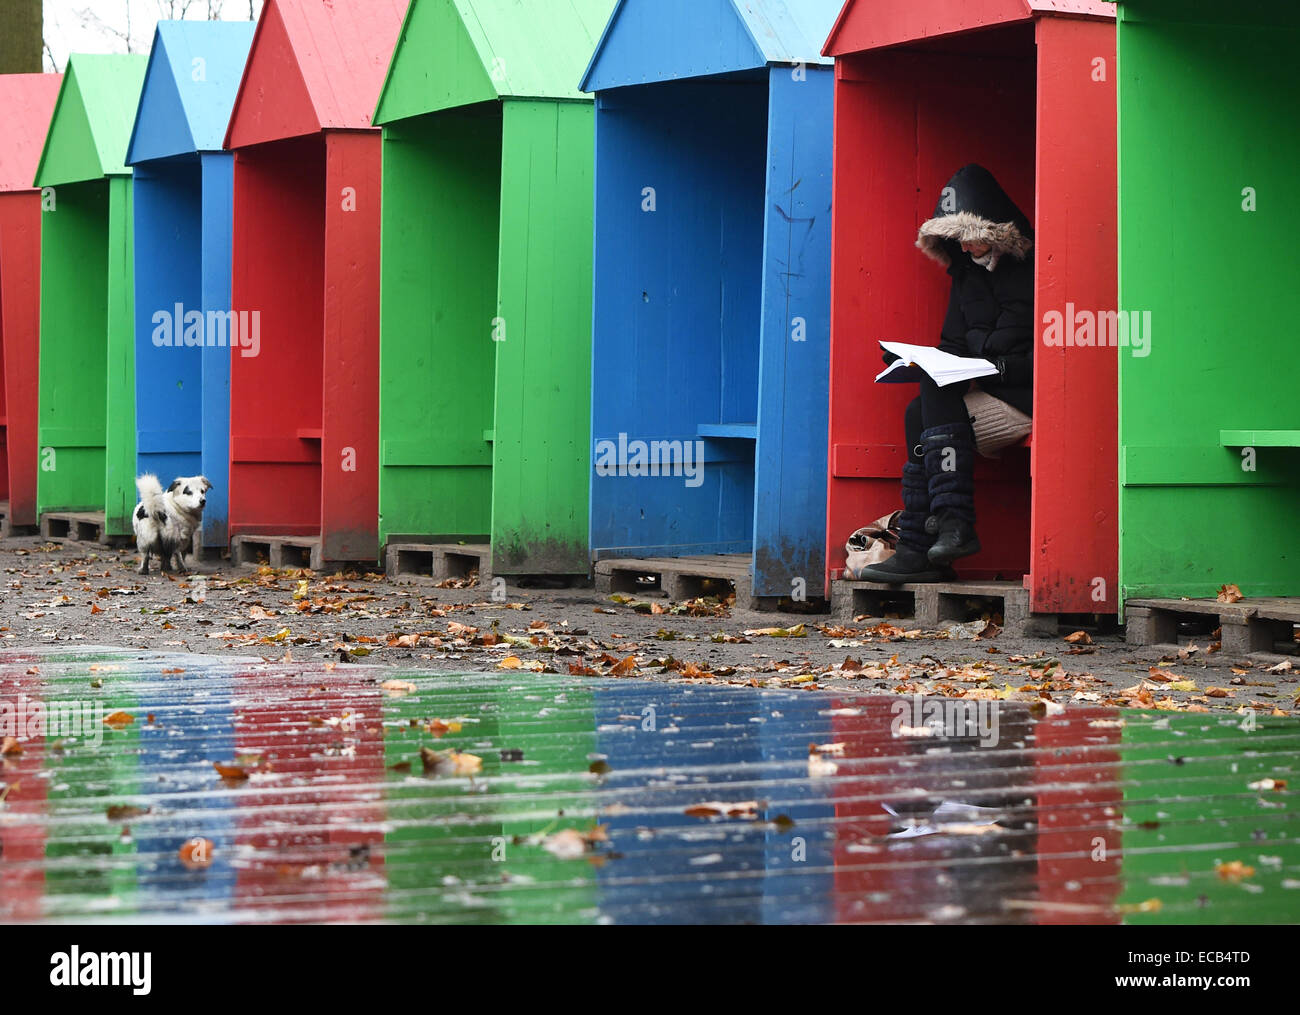 A young woman sits inside a colourful hut while it's raining at Tiergarten, Berlin, Germany, 11 December 2104. Photo: Jens Kalaene/dpa Stock Photo